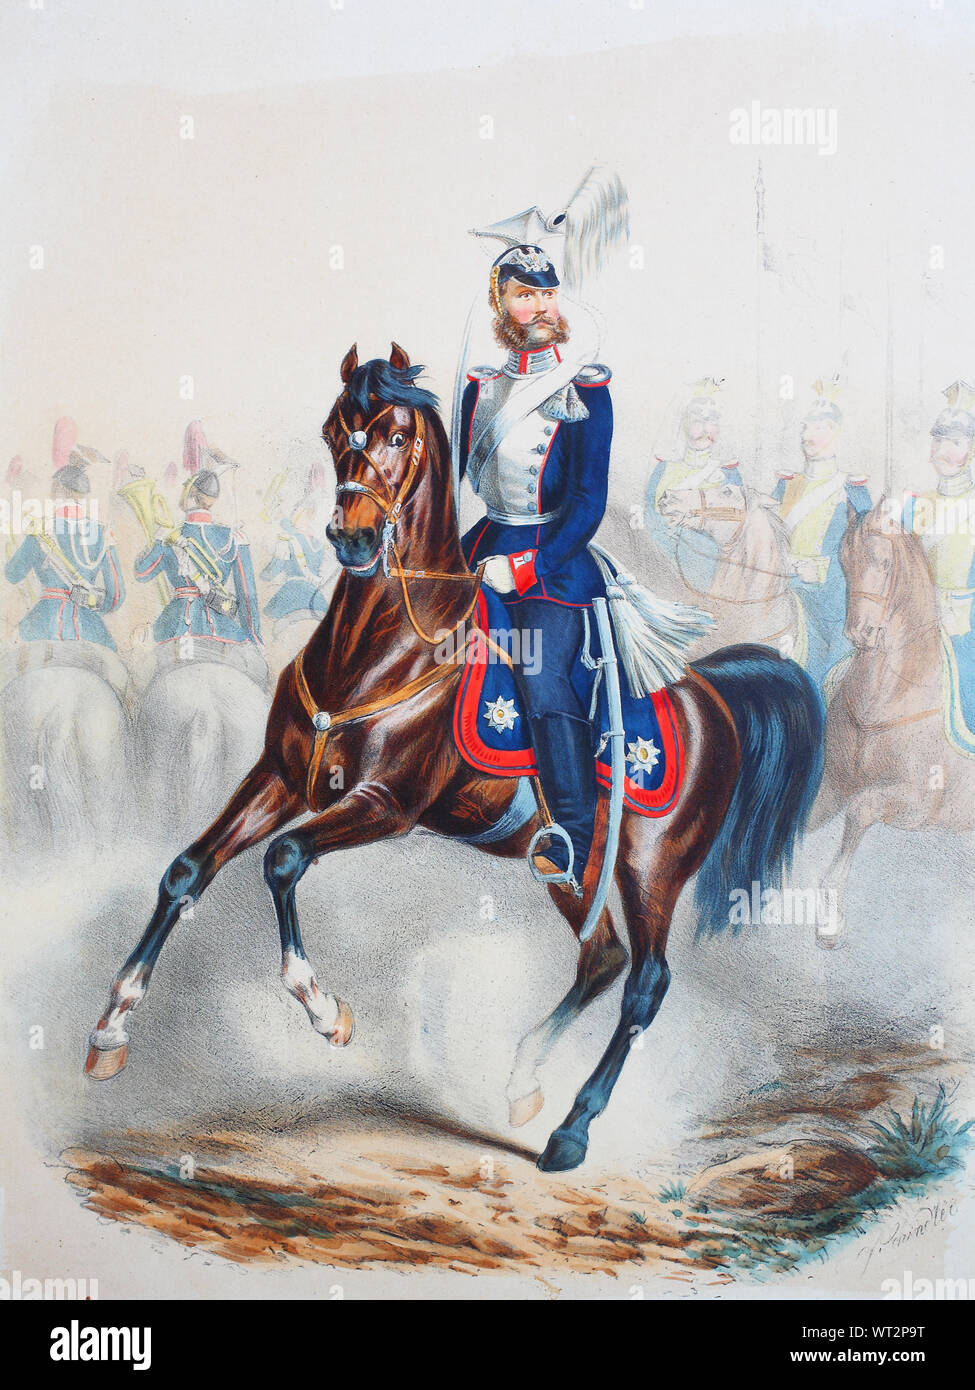 Royal Prussian Army, Guards Corps, Preußens Heer, preussische Garde, Garde Ulanen Regiment, Trompeter, Offizier, gemeine Soldaten, Digital improved reproduction of an illustration from the 19th century Stock Photo